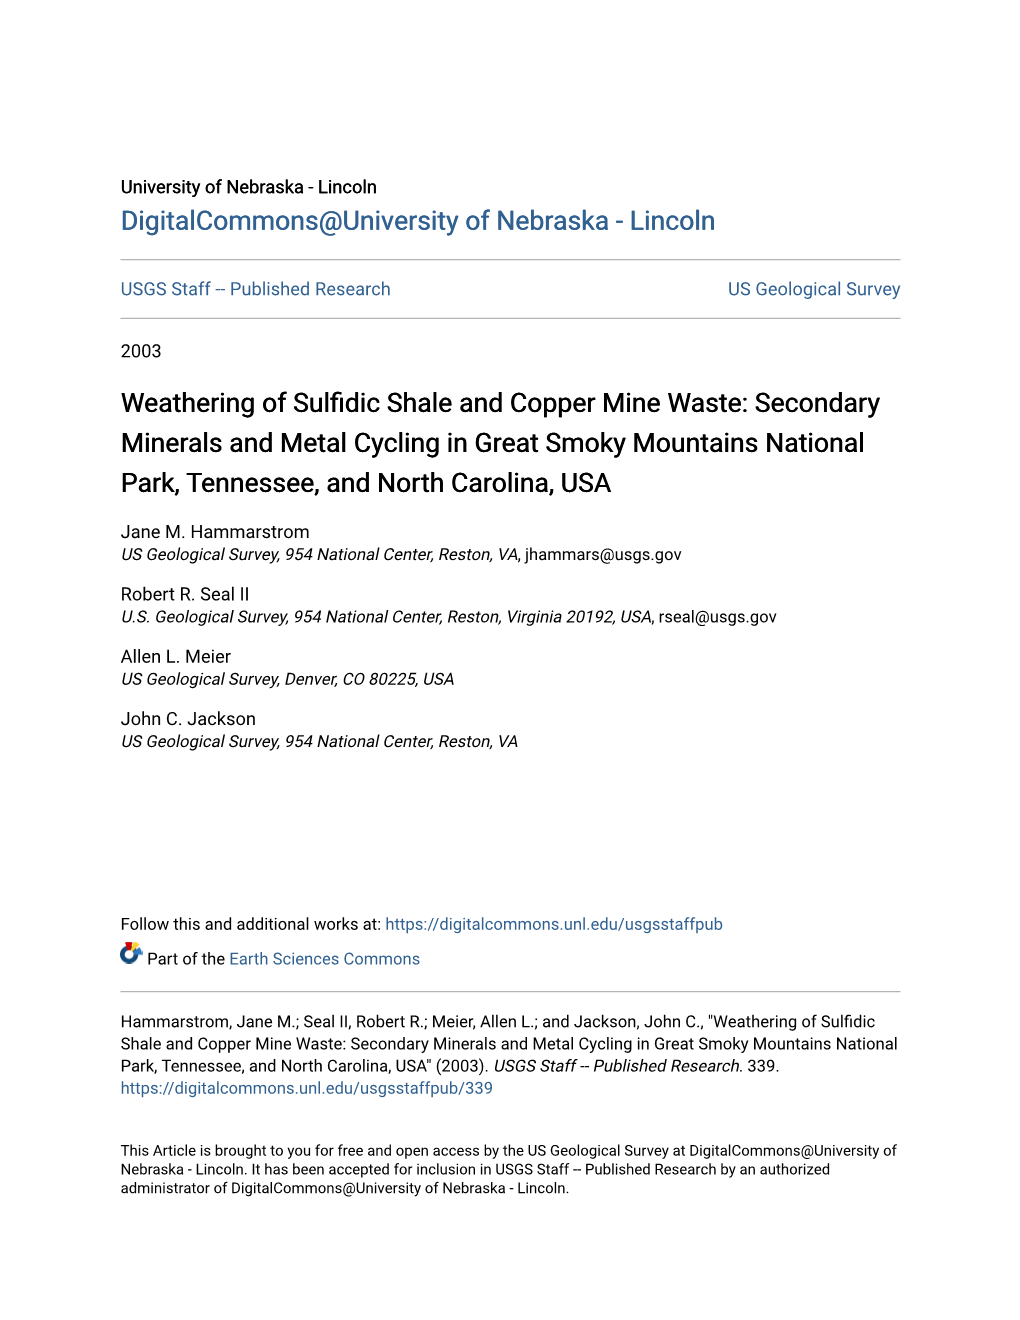 Weathering of Sulfidic Shale and Copper Mine Waste: Secondary